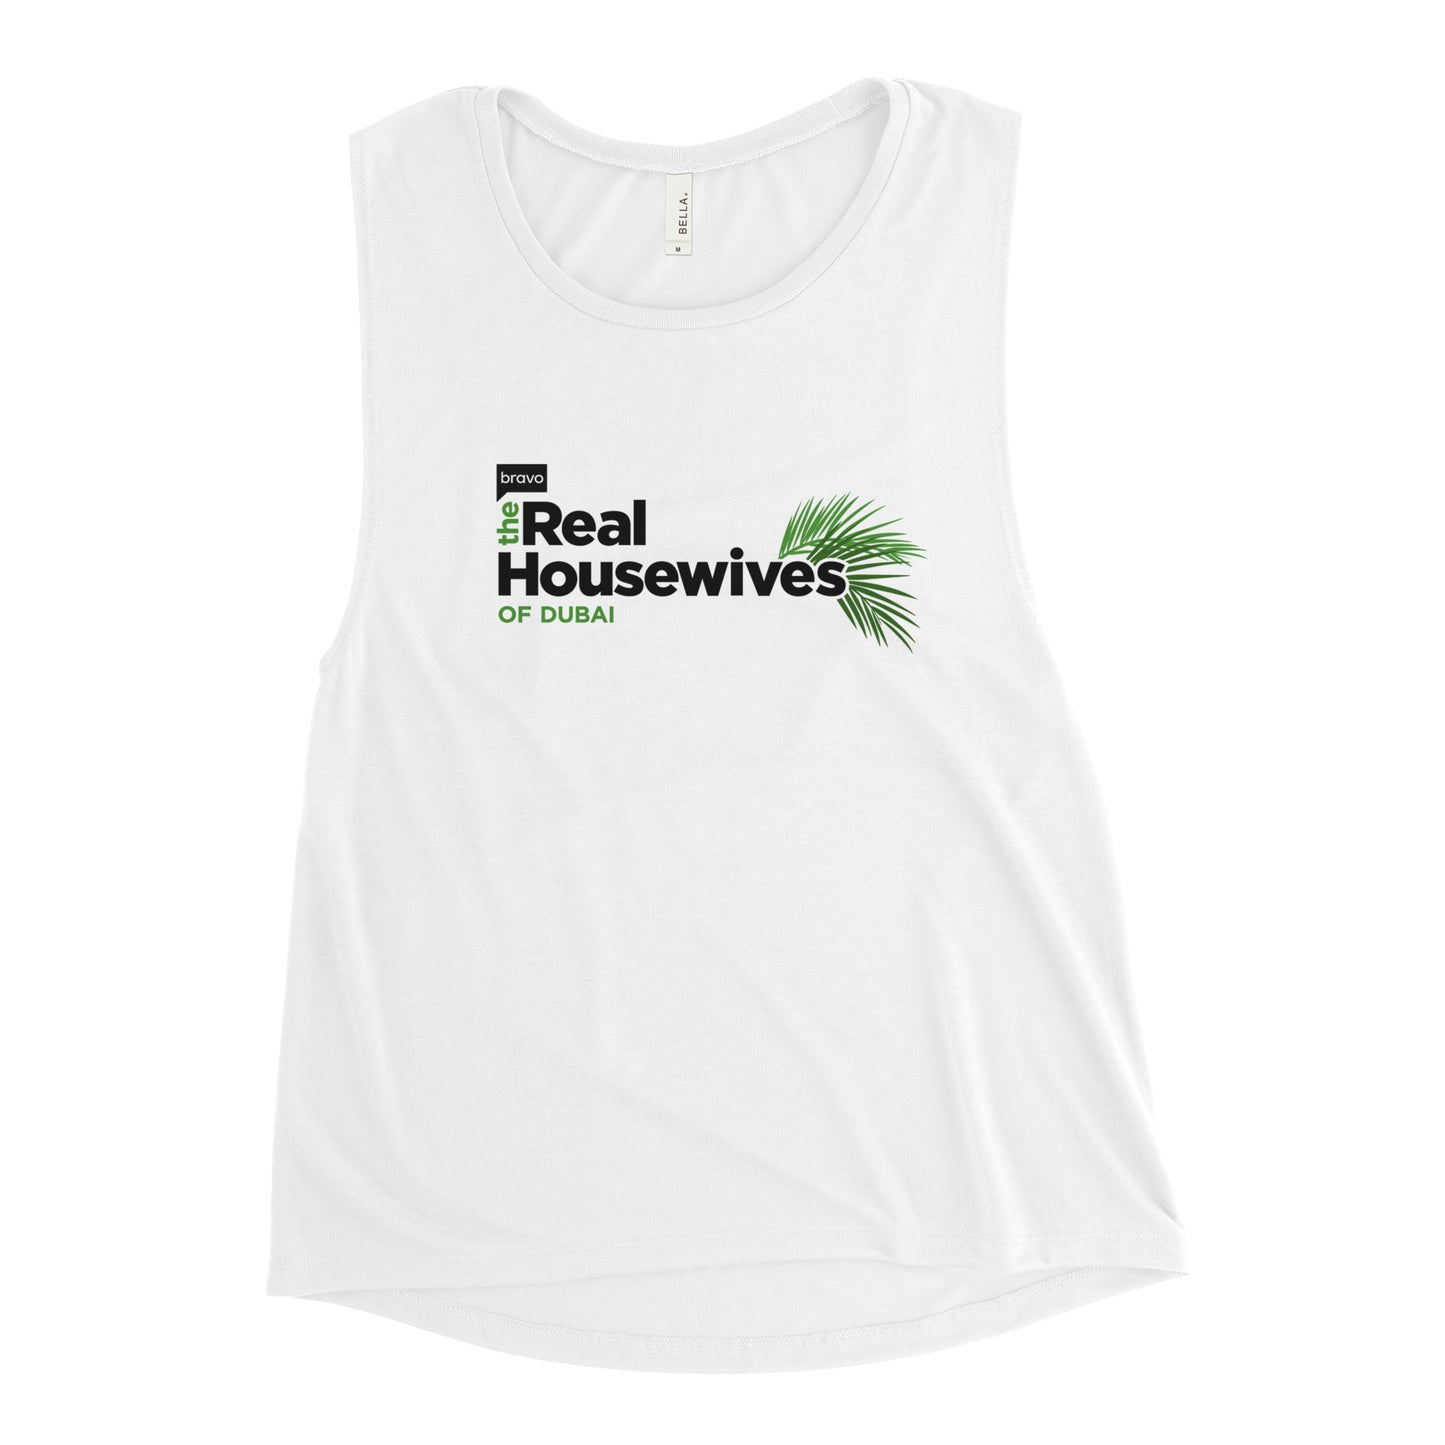 The Real Housewives of Dubai Tank Top